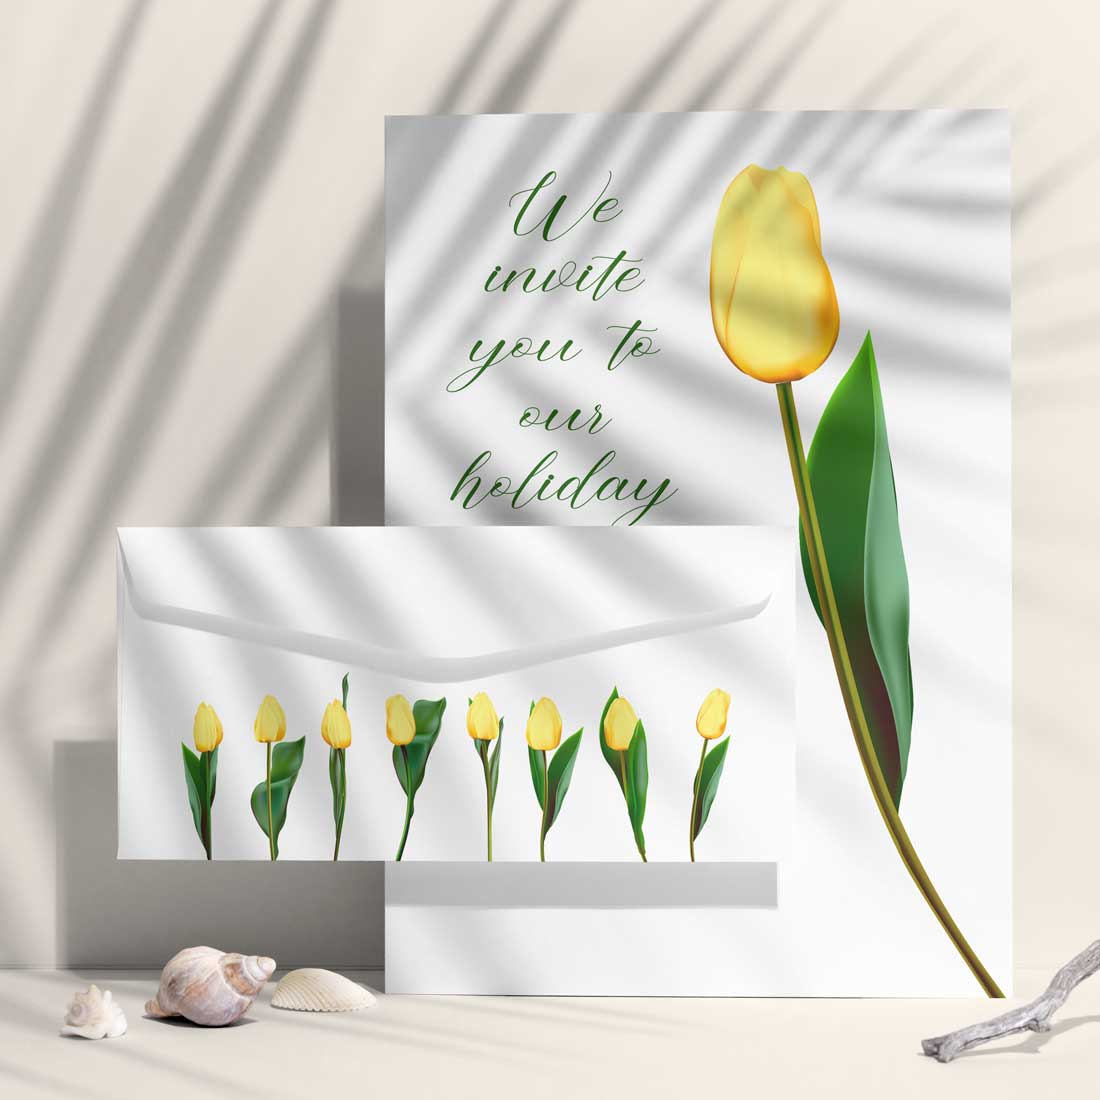 Greeting card with a yellow tulip on it.